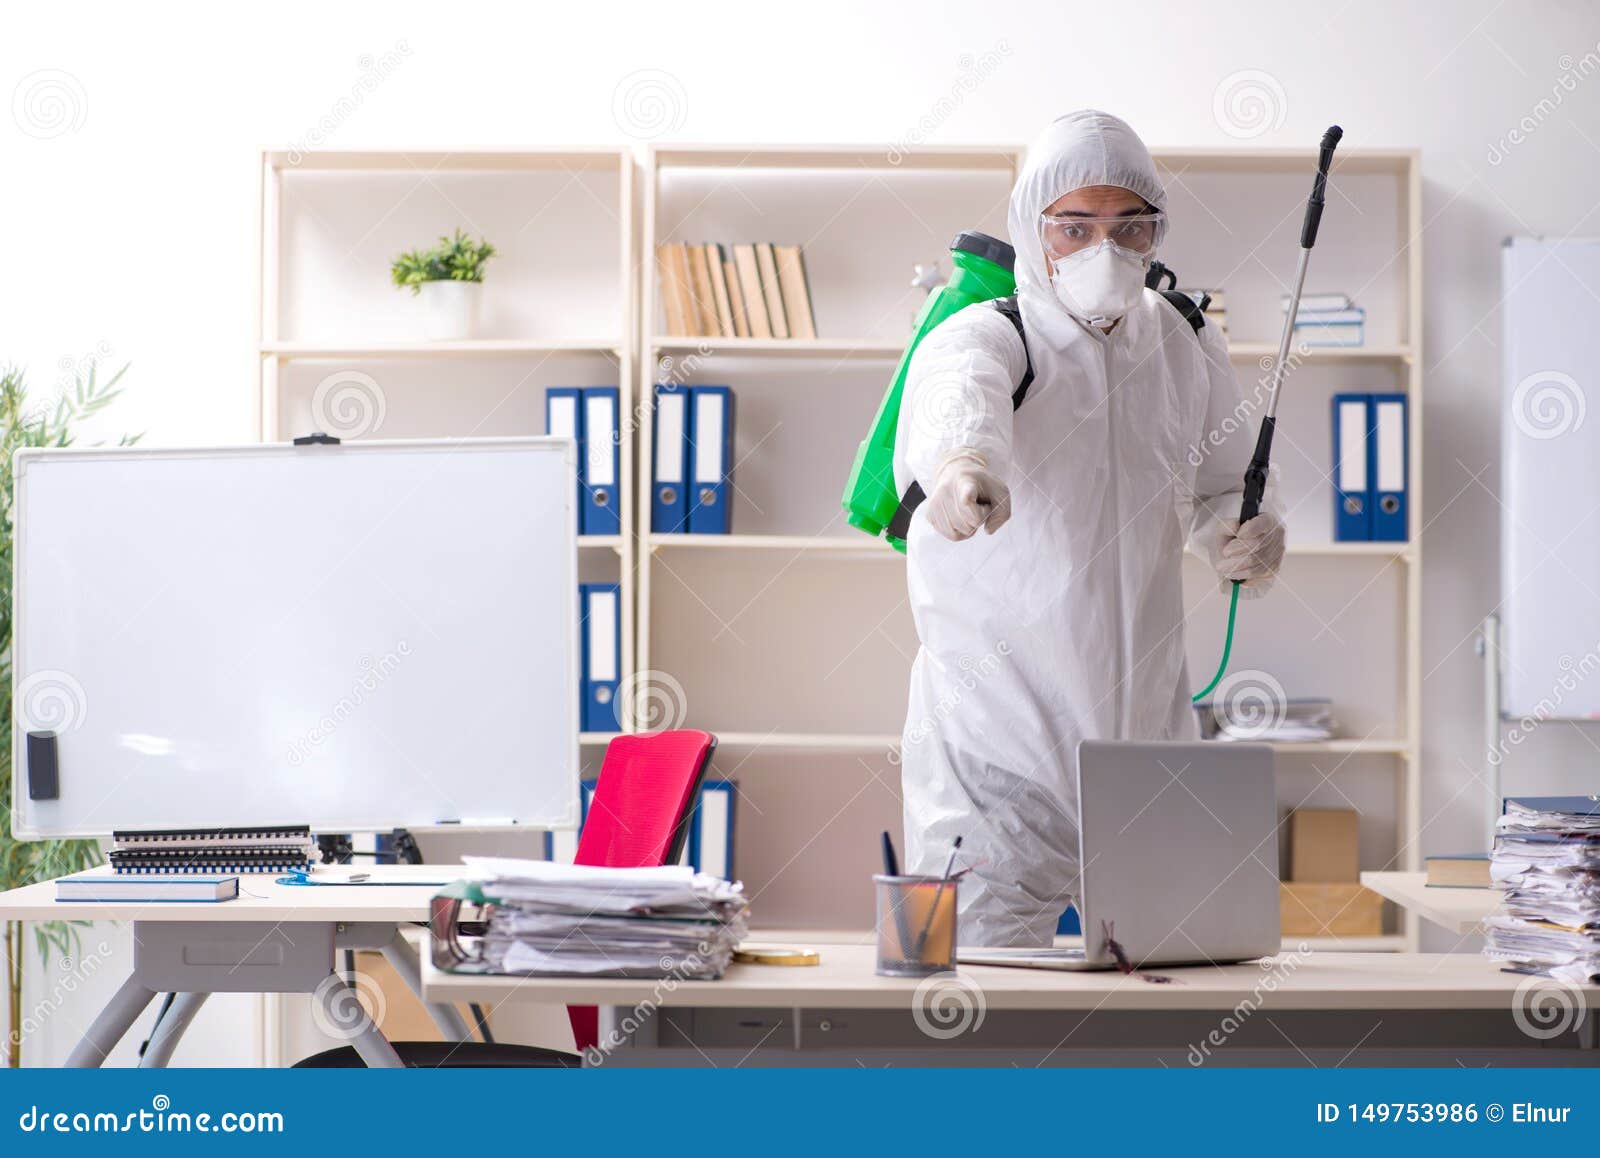 Professional Contractor Doing Pest Control At Office Stock Photo - Image of pointing ...